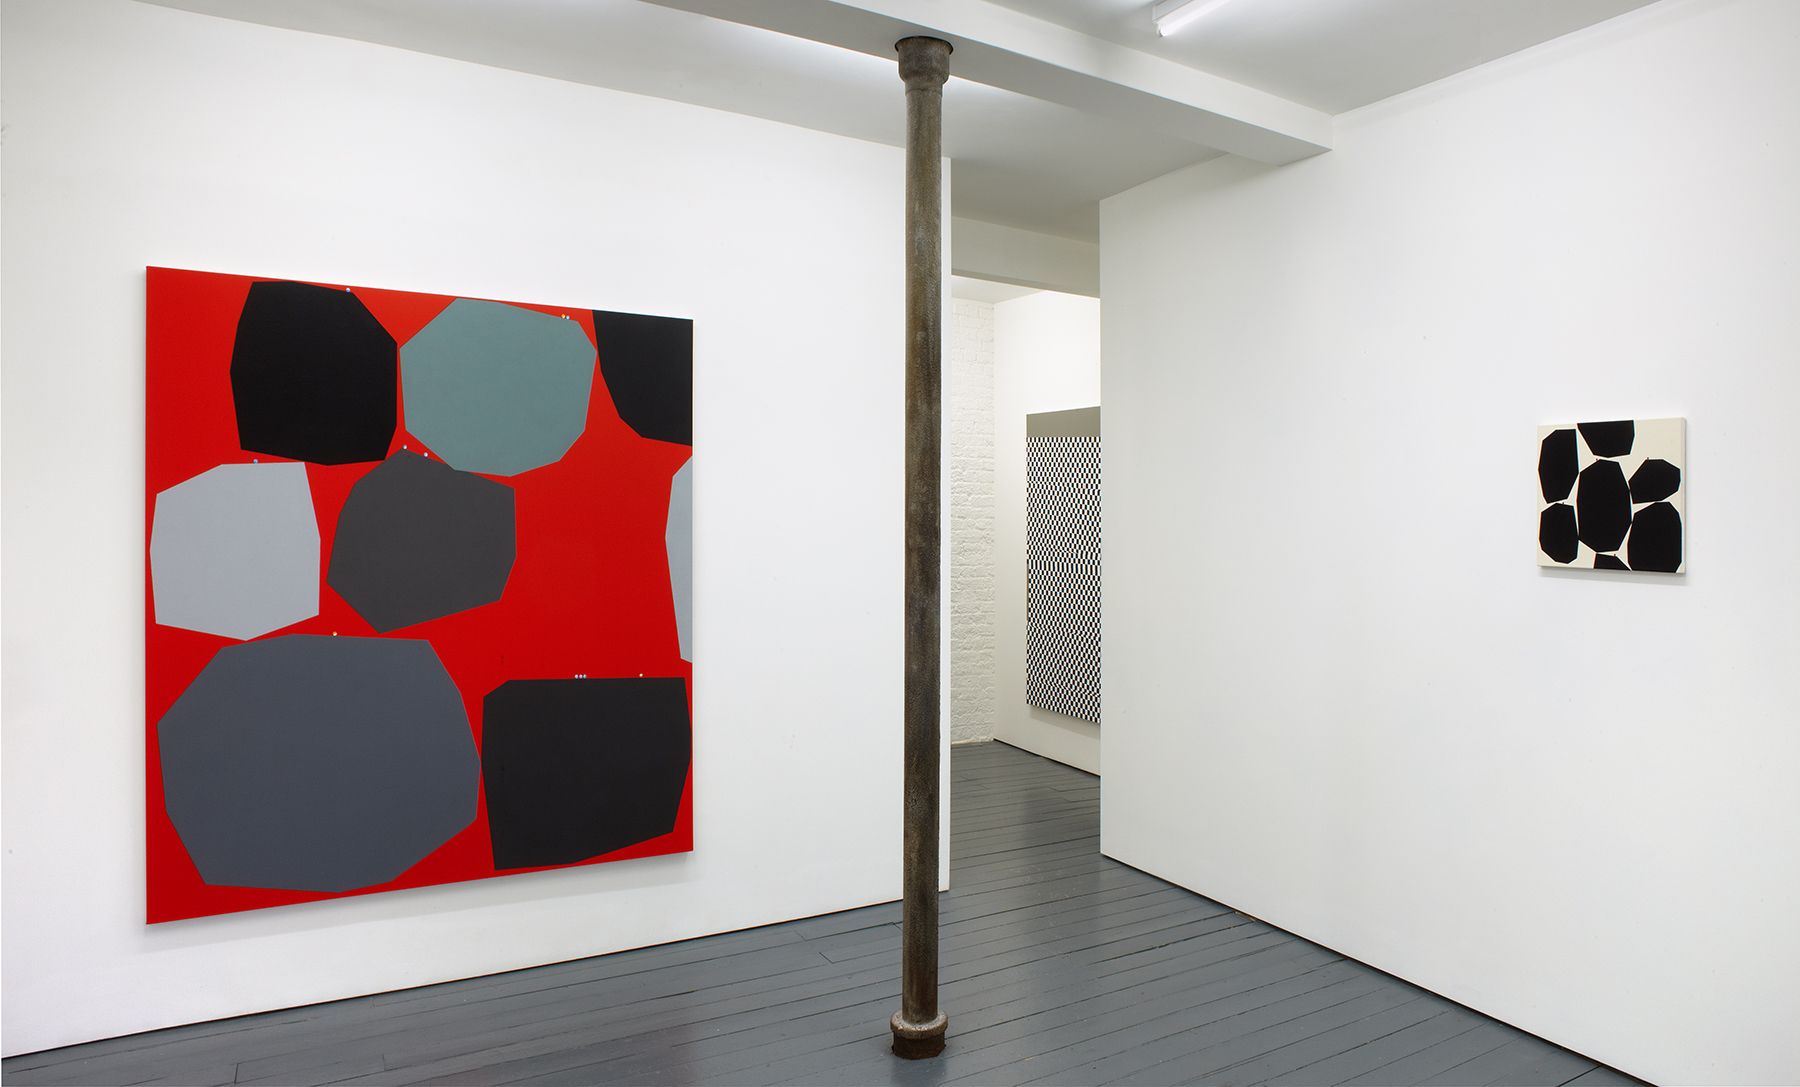 Installation view, Daniel Sturgis, And then again, 2014